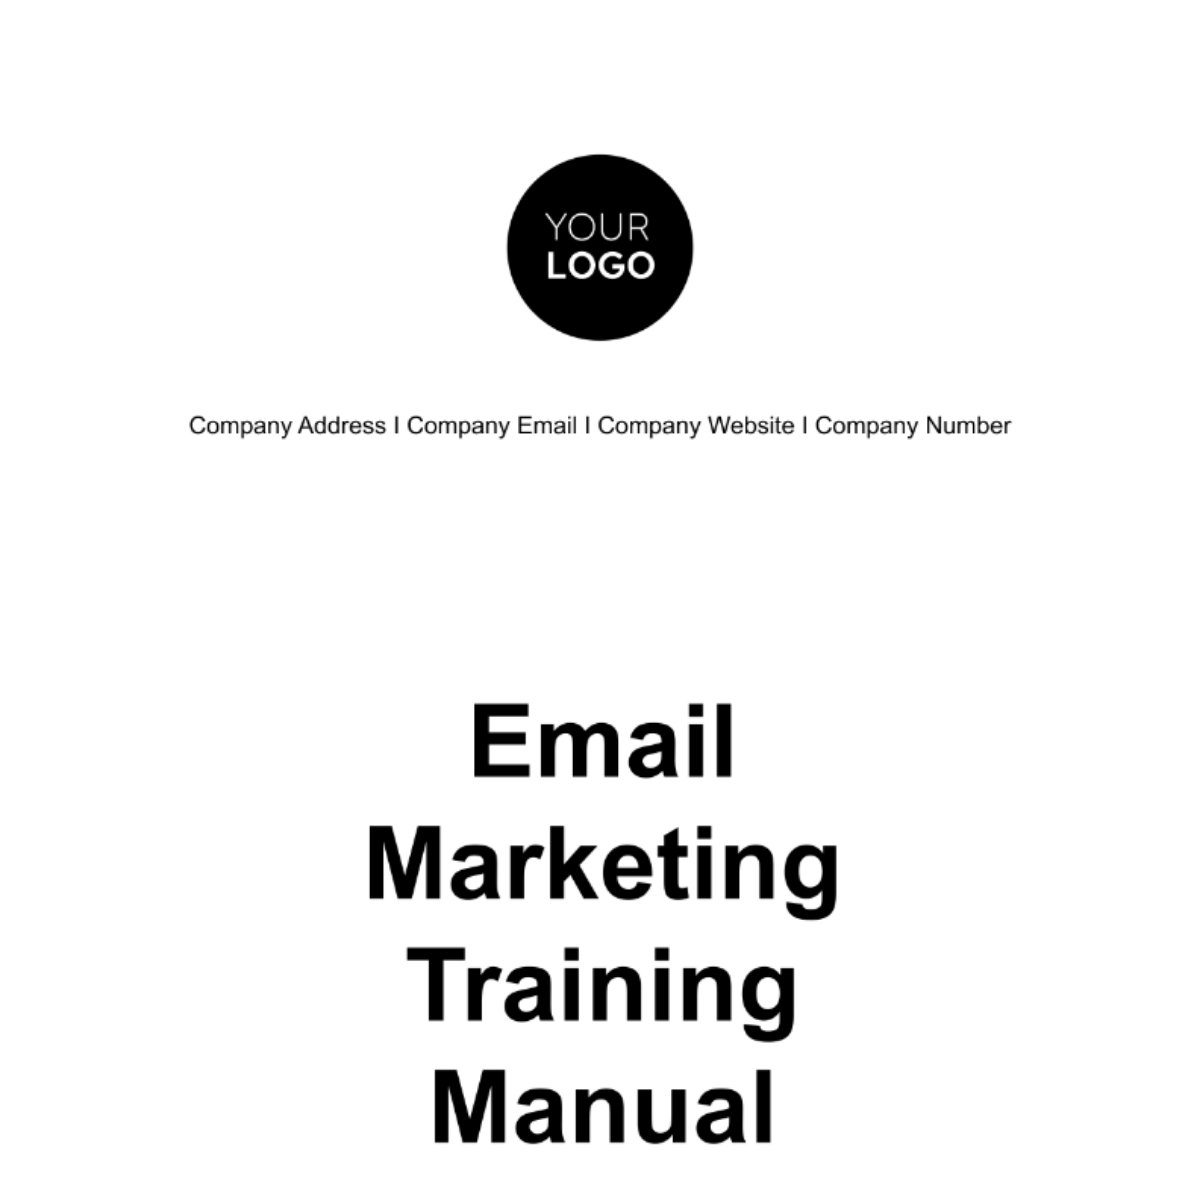 Email Marketing Training Manual Template